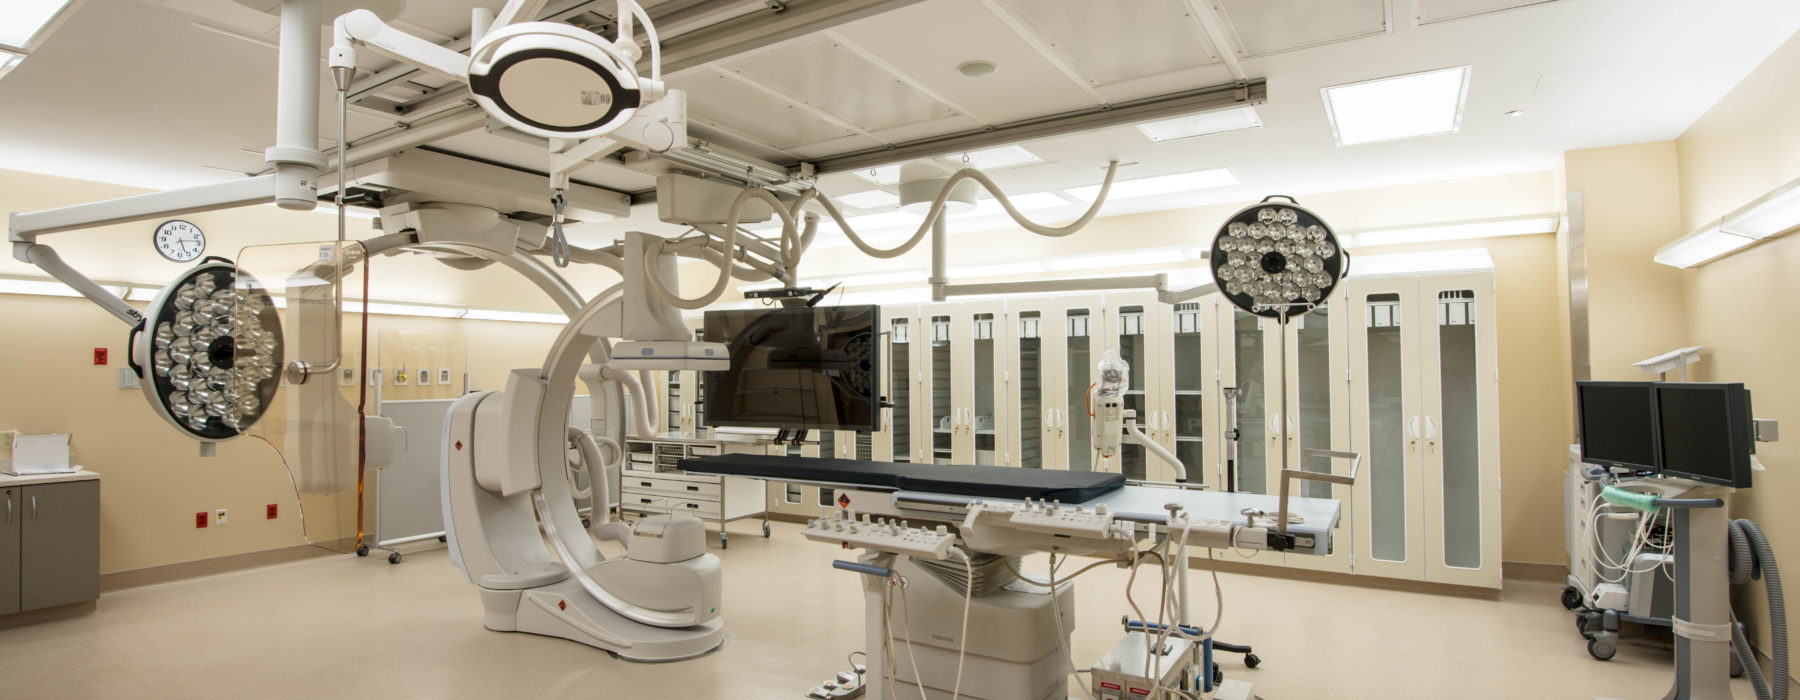 Operating room in the David Grant Medical Center